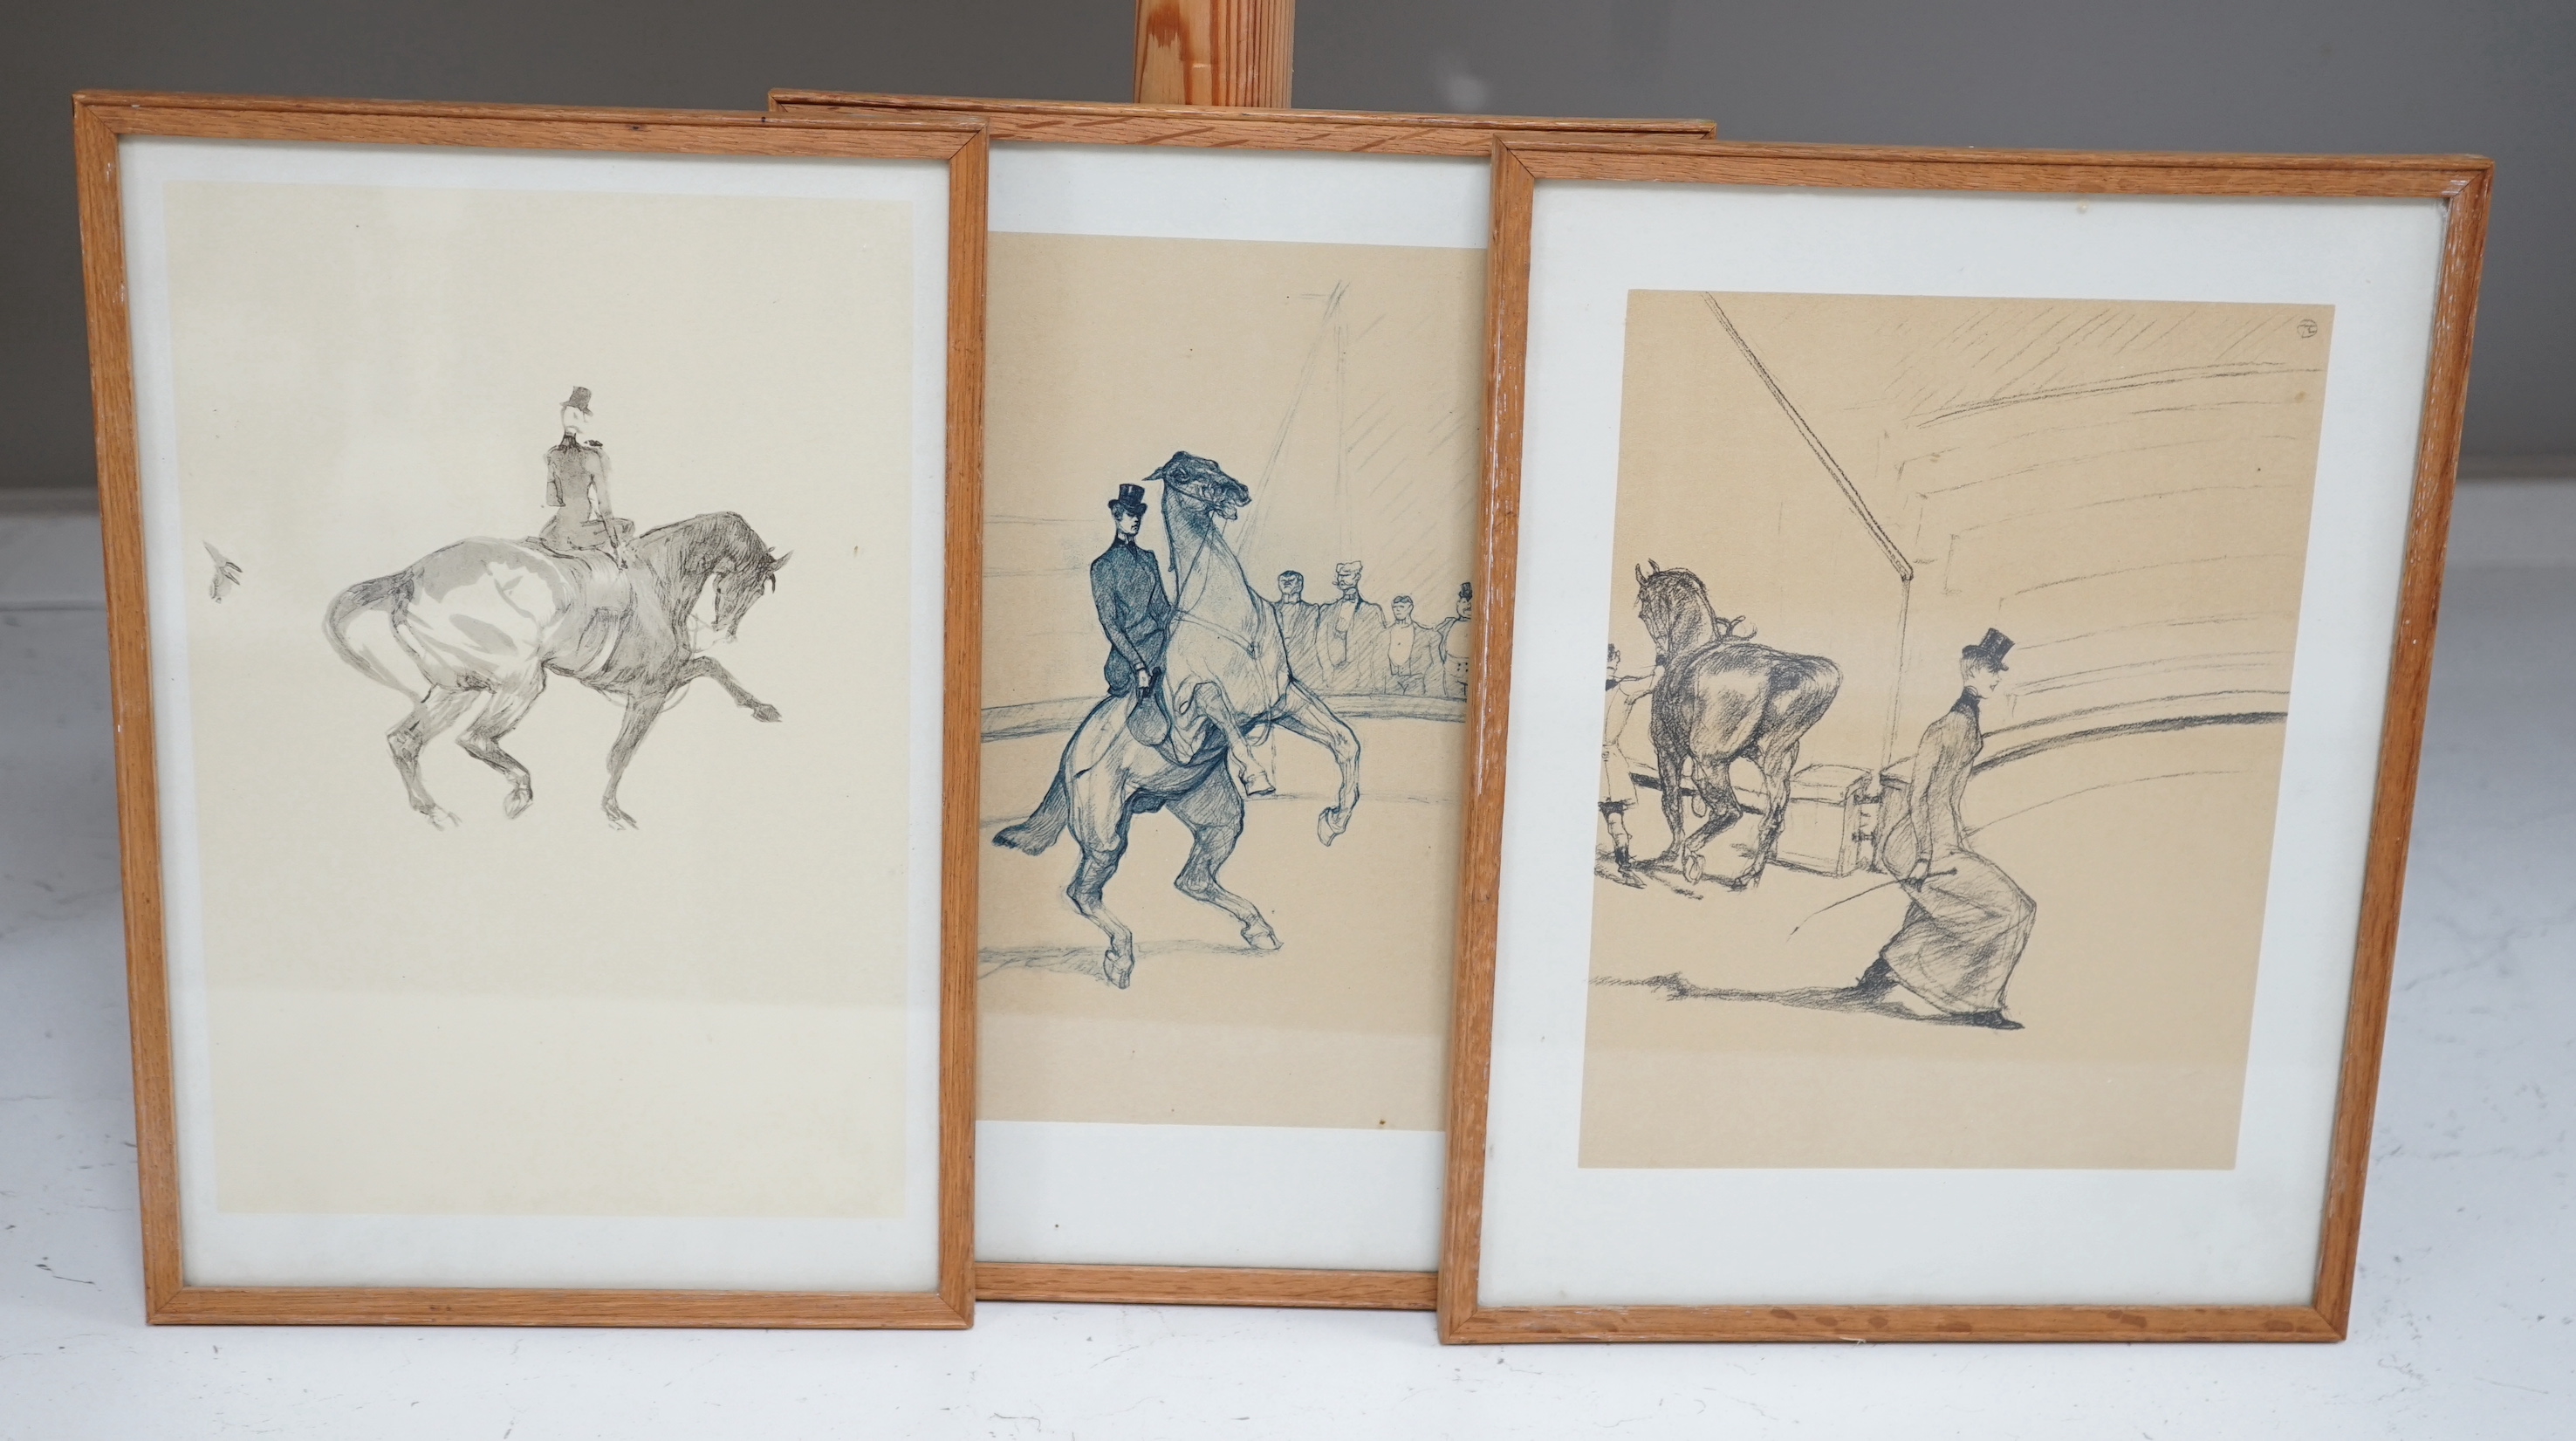 After Henri de Toulouse-Lautrec (French, 1864-1901), set of three lithographs, Spanish riding school and dressage scenes, unsigned, each 31 x 23cm                                                                          